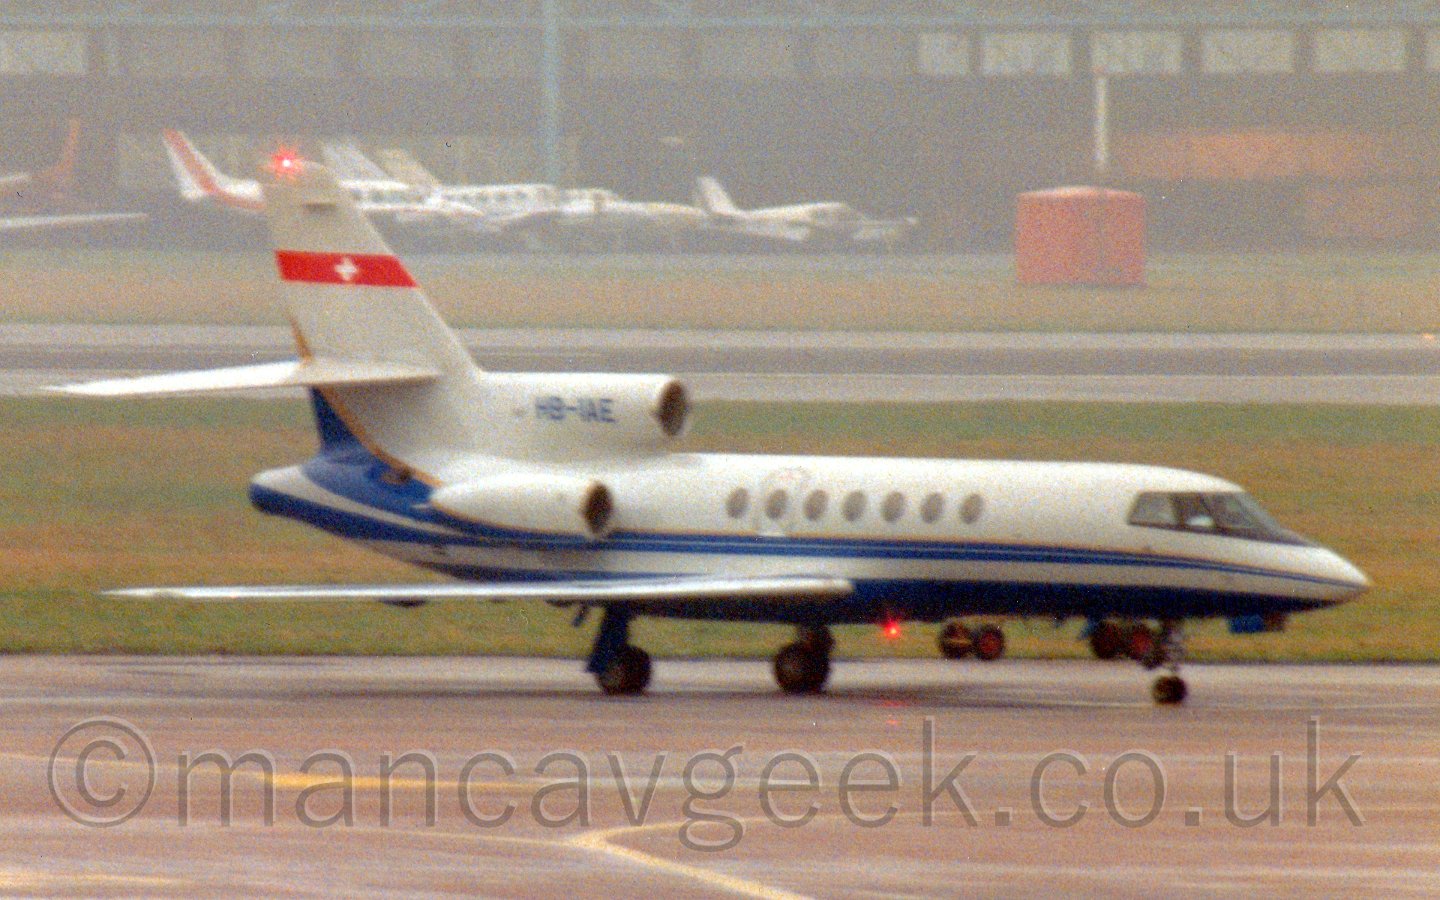 Side view of a 3 engined bizjet parked facing to the right. The plane is mostly white, with a dark blue belly, and a dark blue stripe running along the body, sweeping up arund the lower rear of the engines and tail, with a thin gold stripe on the top edge. There is a red band across the top of the tail whith a white cross in the middle, and the registration "HB-IAE" on the centre engine intake. There is a red beacon shining under the fuselage, with another on the top of the tail. In the background, grass, a runway, and more grass leads up to a large black hangar with a selection of light aircraft parked in front, slowly being swallowed up by mist.